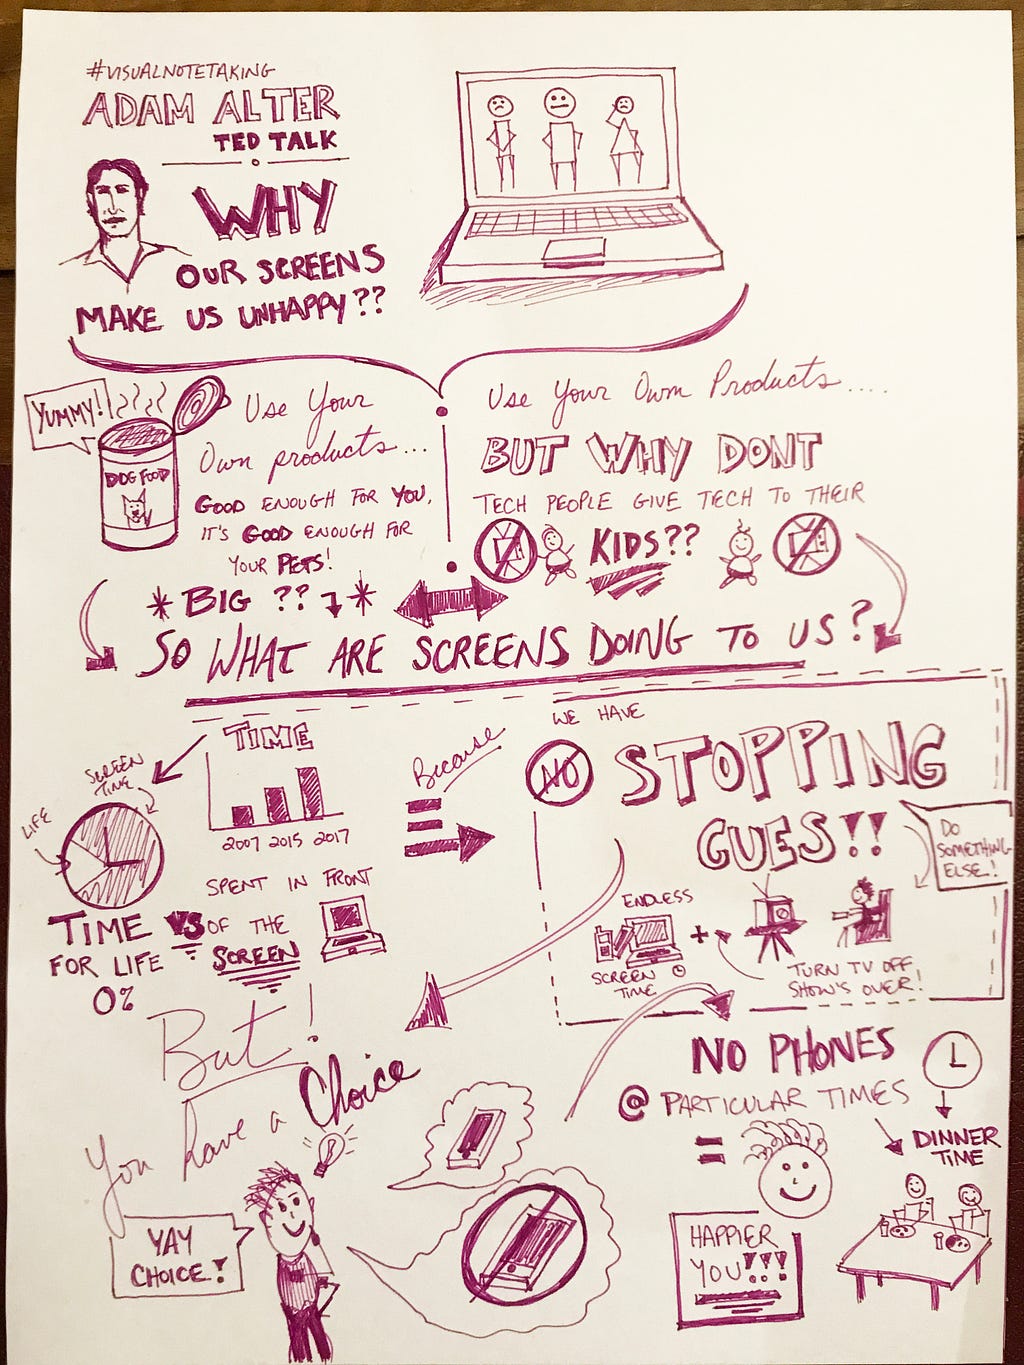 Visual notes by Allyson McAbee on TED Talk “Why Screens Make Us Less Happy” by Adam Alter.